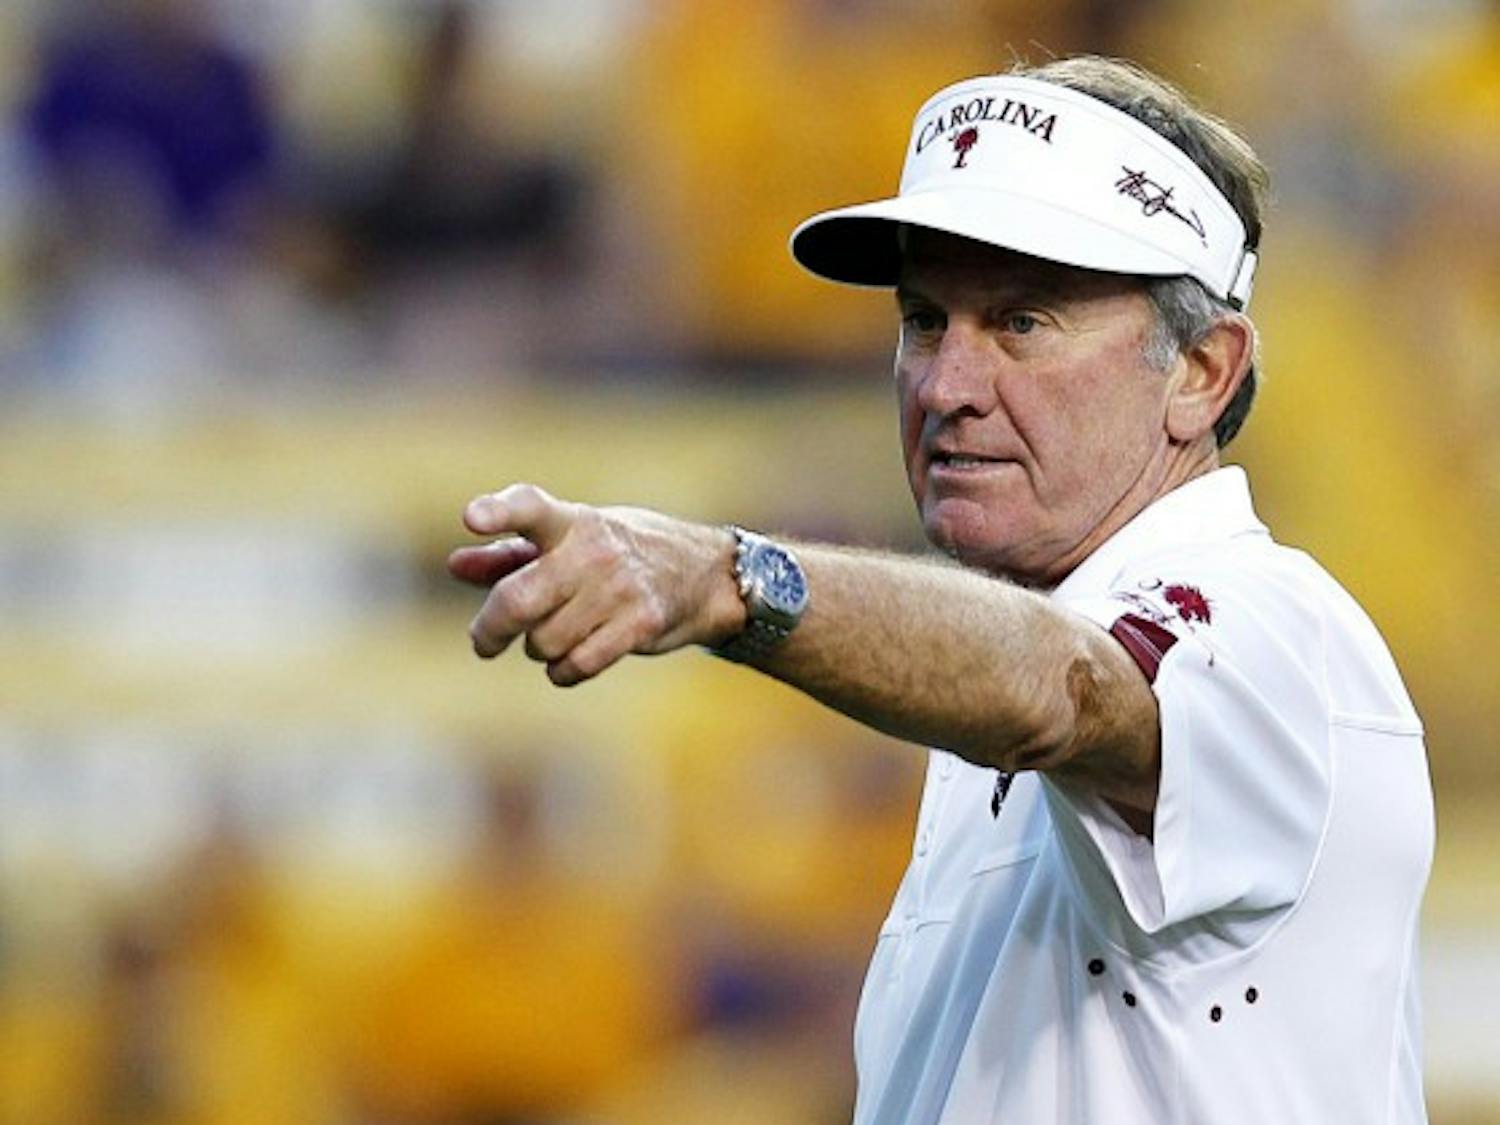 South Carolina coach Steve Spurrier calls out to his team before its game against LSU in Baton Rouge, La., on Saturday. LSU won 23-21.